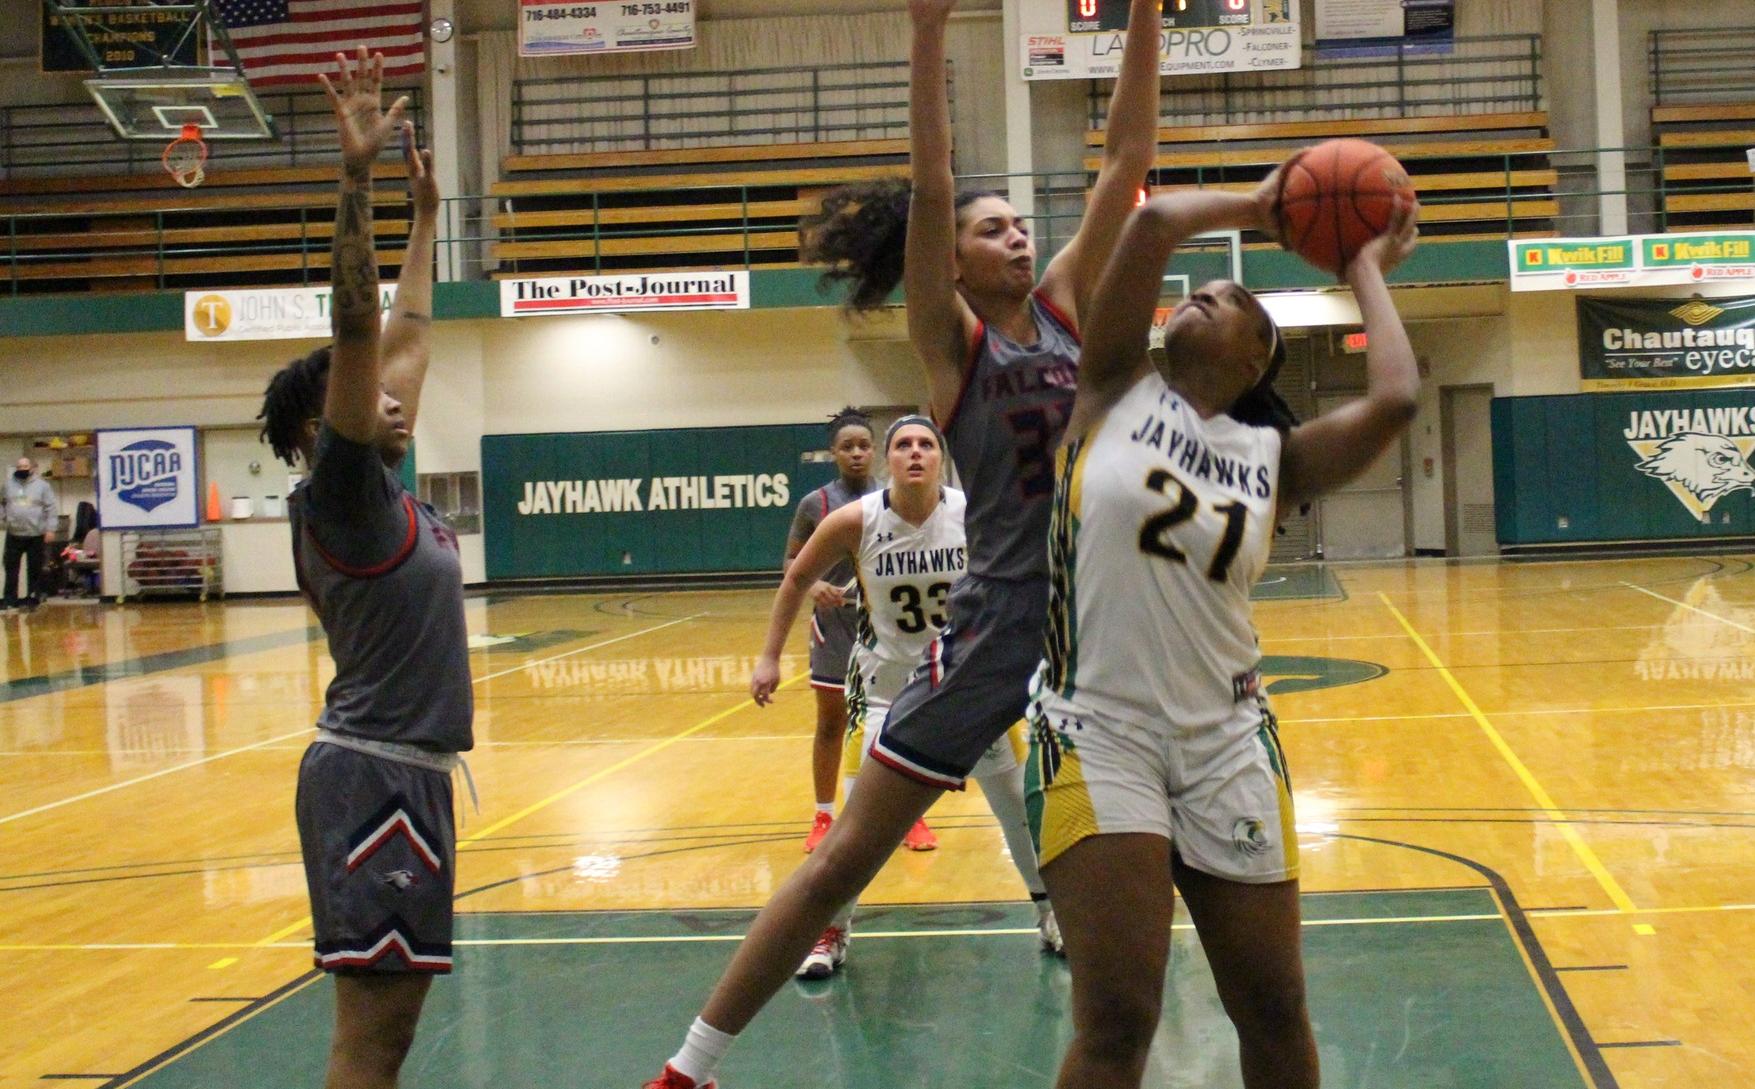 Hicks Records a Double-Double; Jayhawks fall to NCCC, 114-88